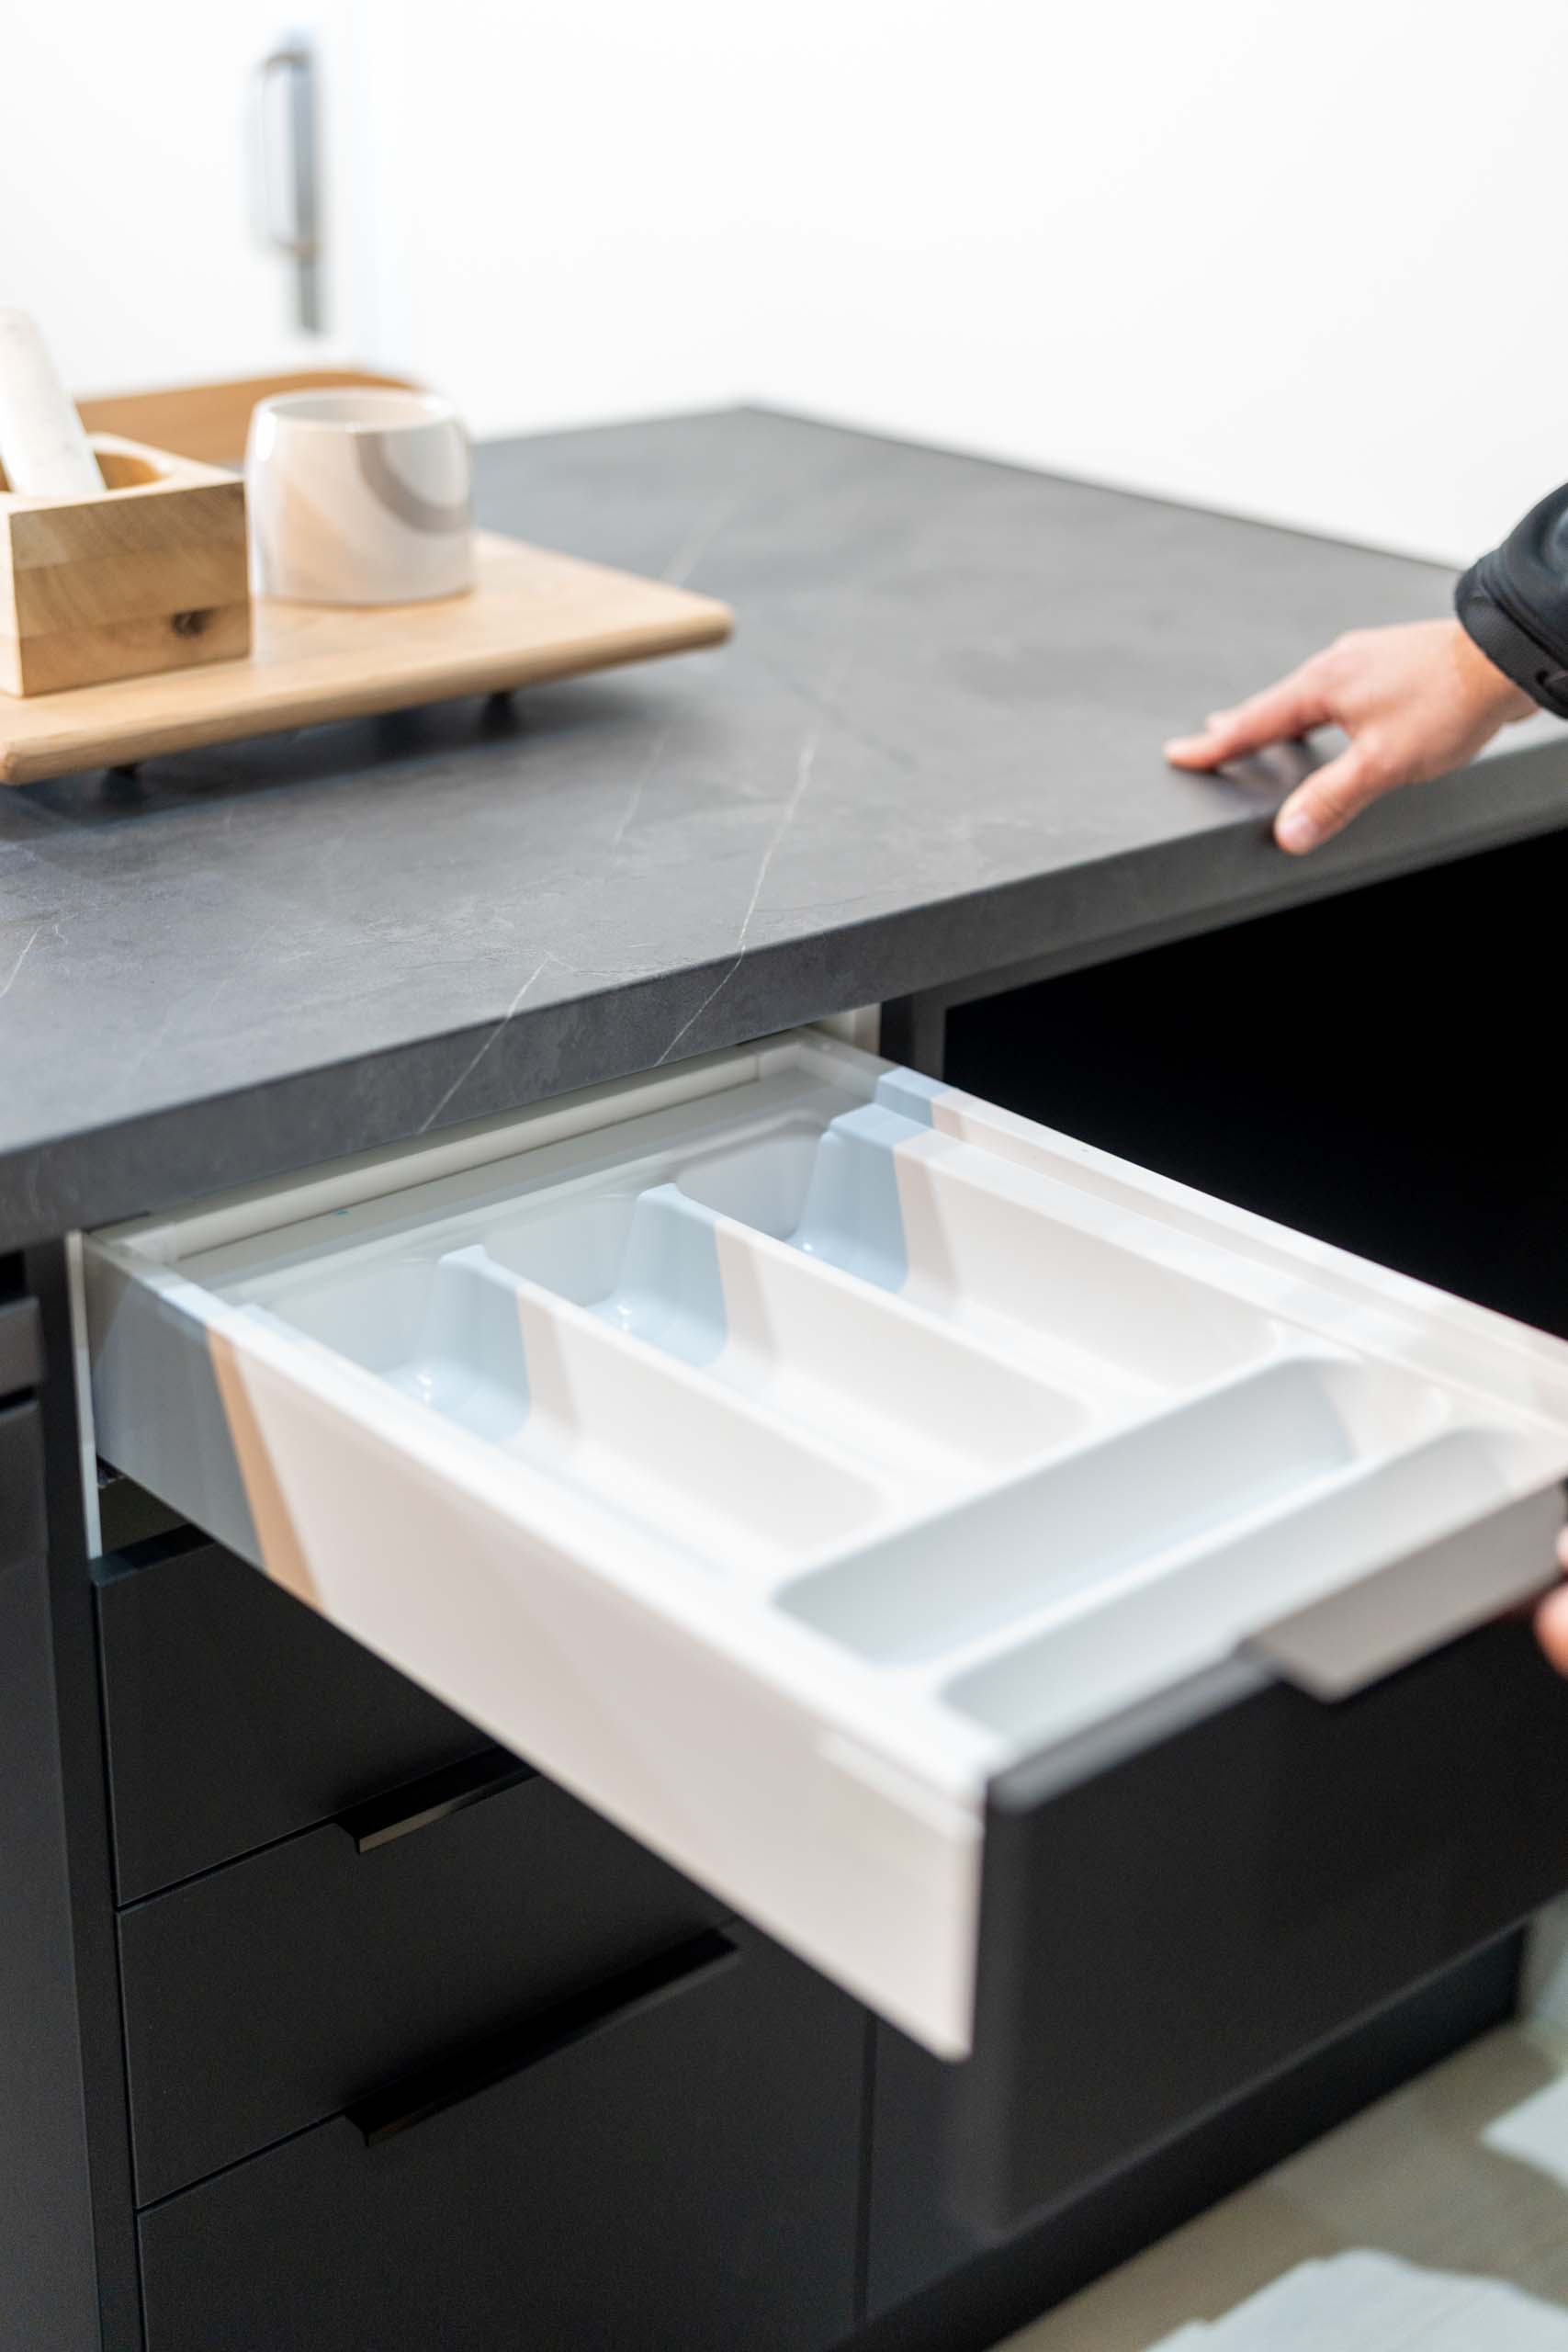 Image showing cutlery tray cabinet accessory in top drawer of drawer cabinet. Cabinetry is black with dark grey veined laminate benchtop and black lip handles.